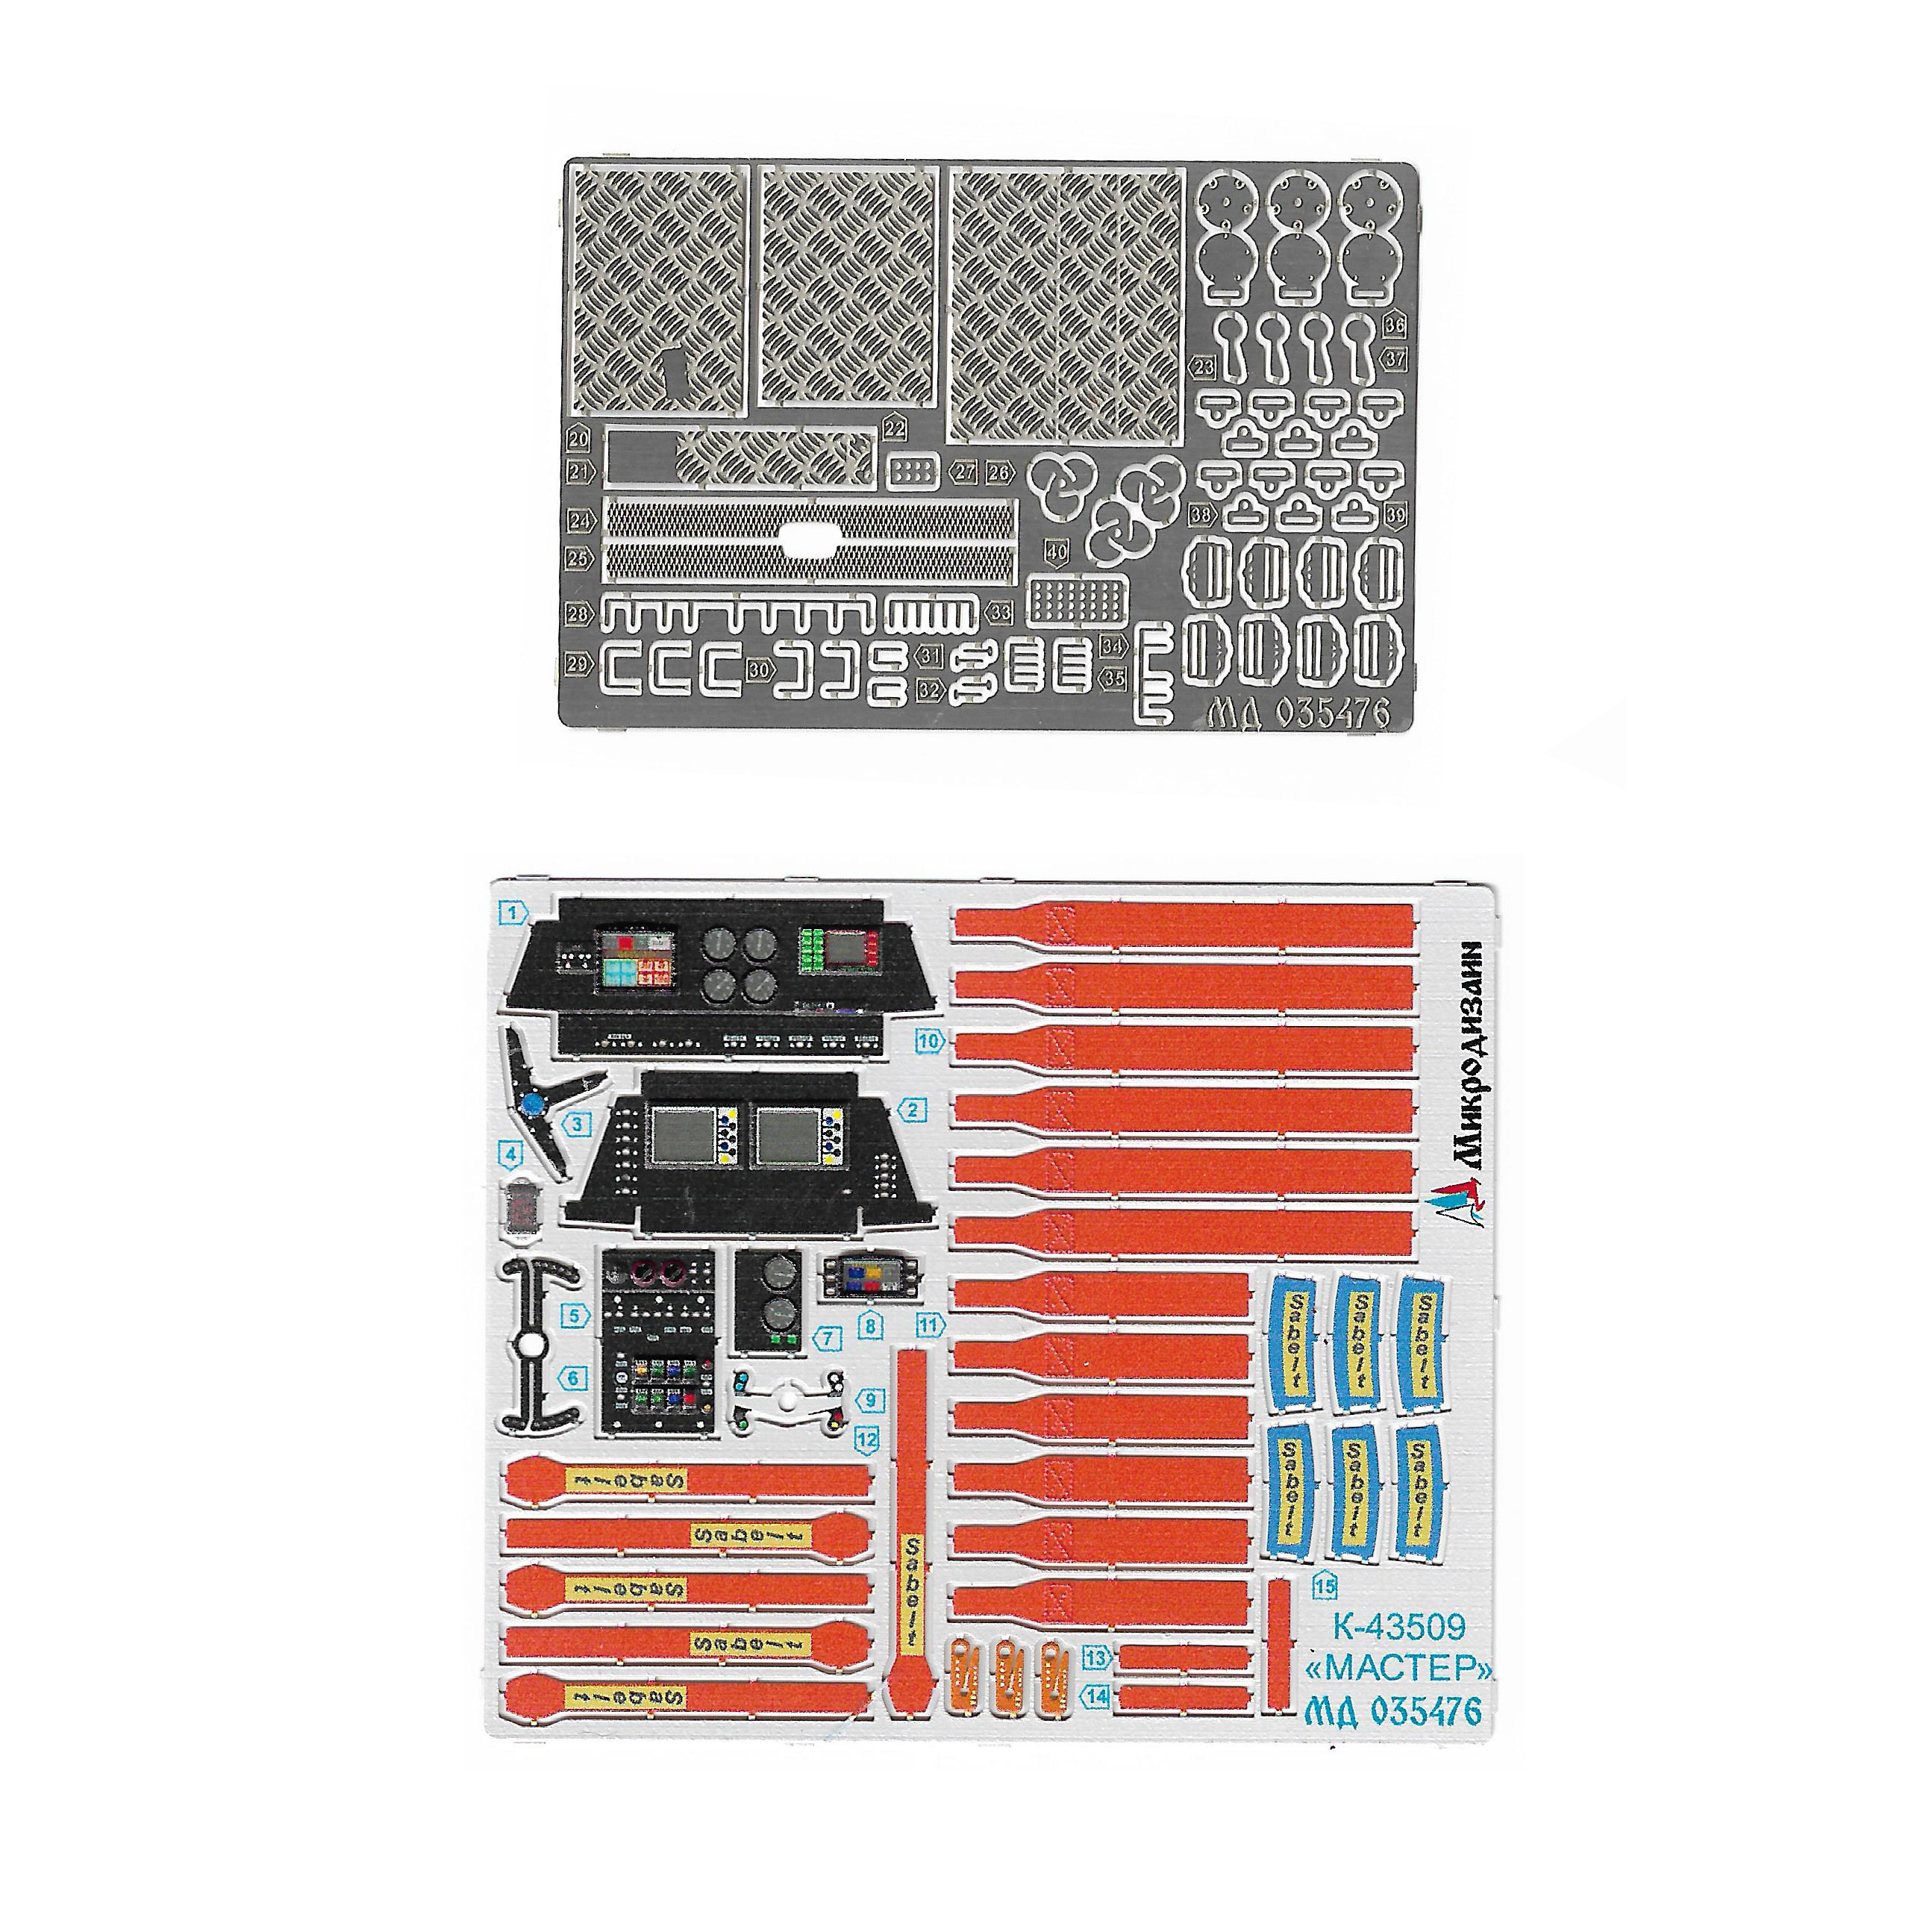 035476 Microdesign 1/35 Photo etching kit for the assembled model K-43509 